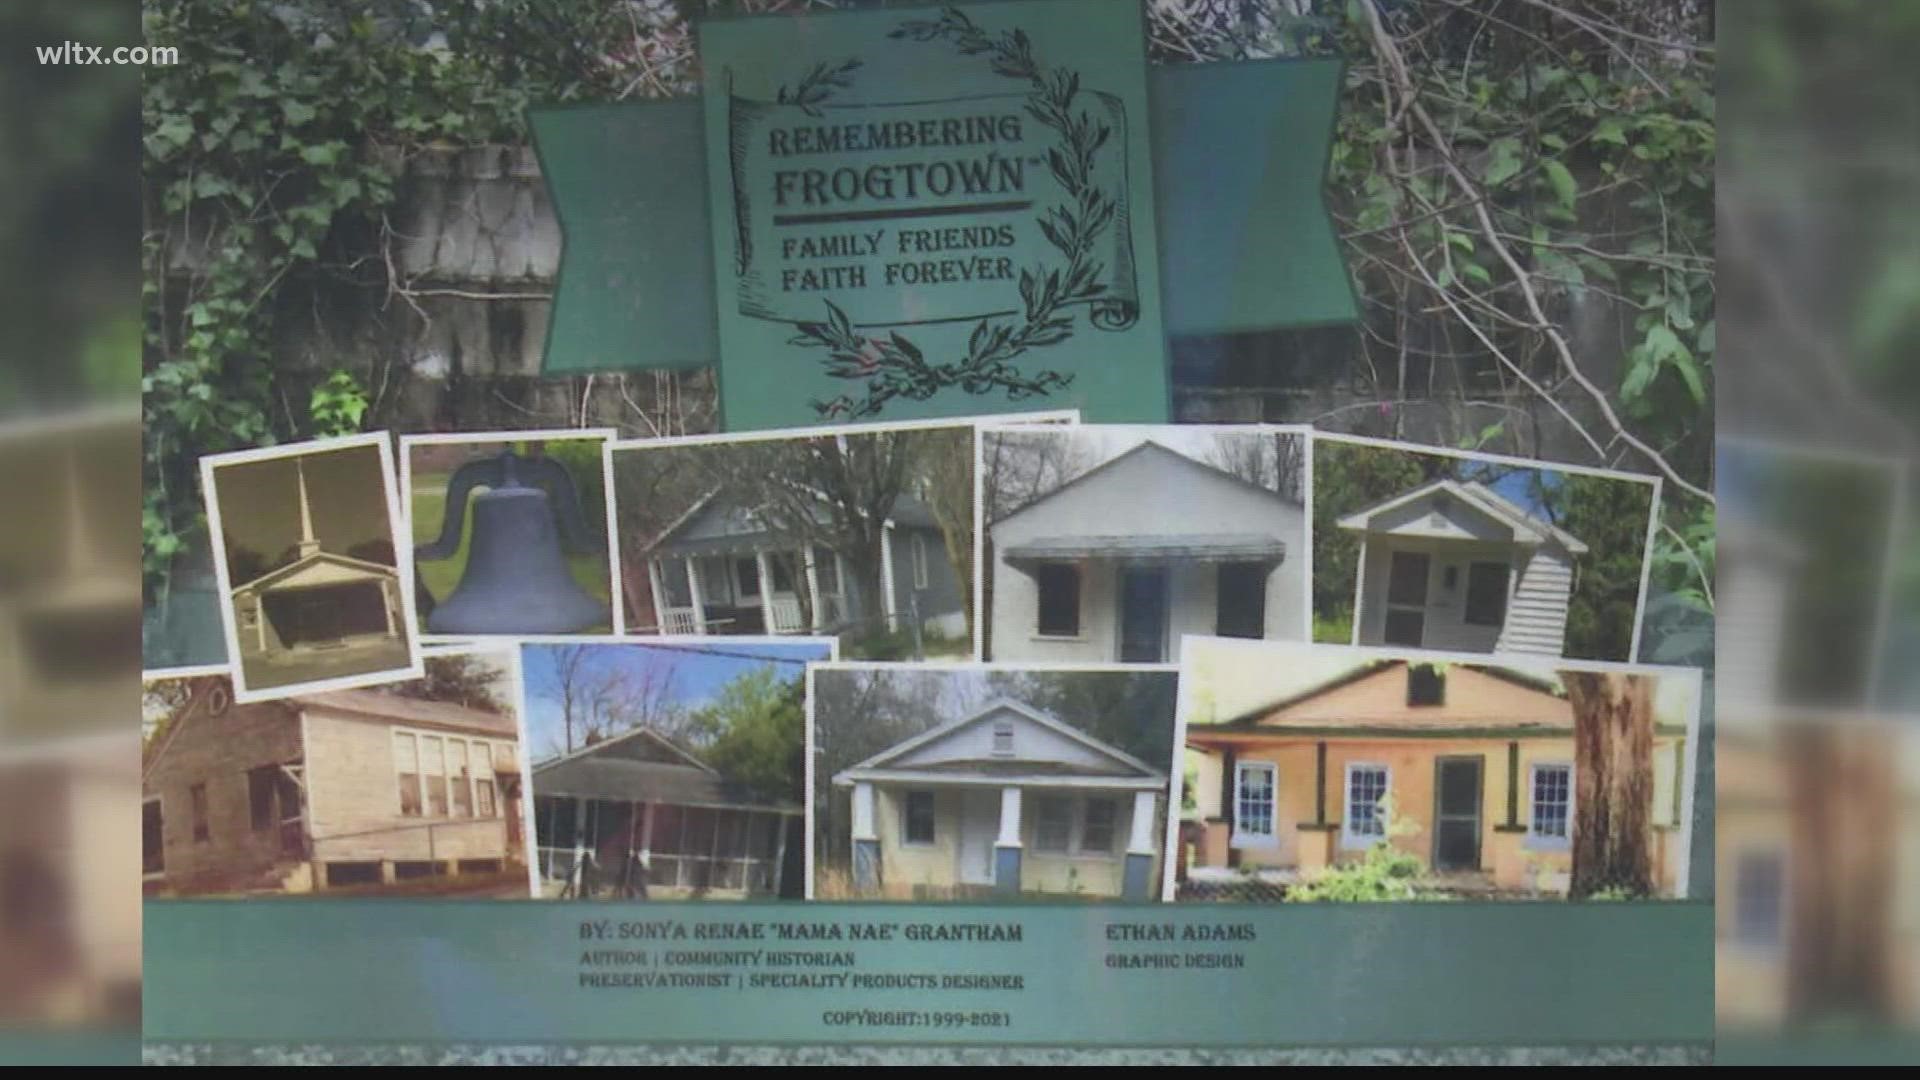 Nestled in Columbia's Shandon community is historic Frogtown. The two streets, Monroe and Heyward, off Kilbourne Road, are a reflection of Black history in Columbia.